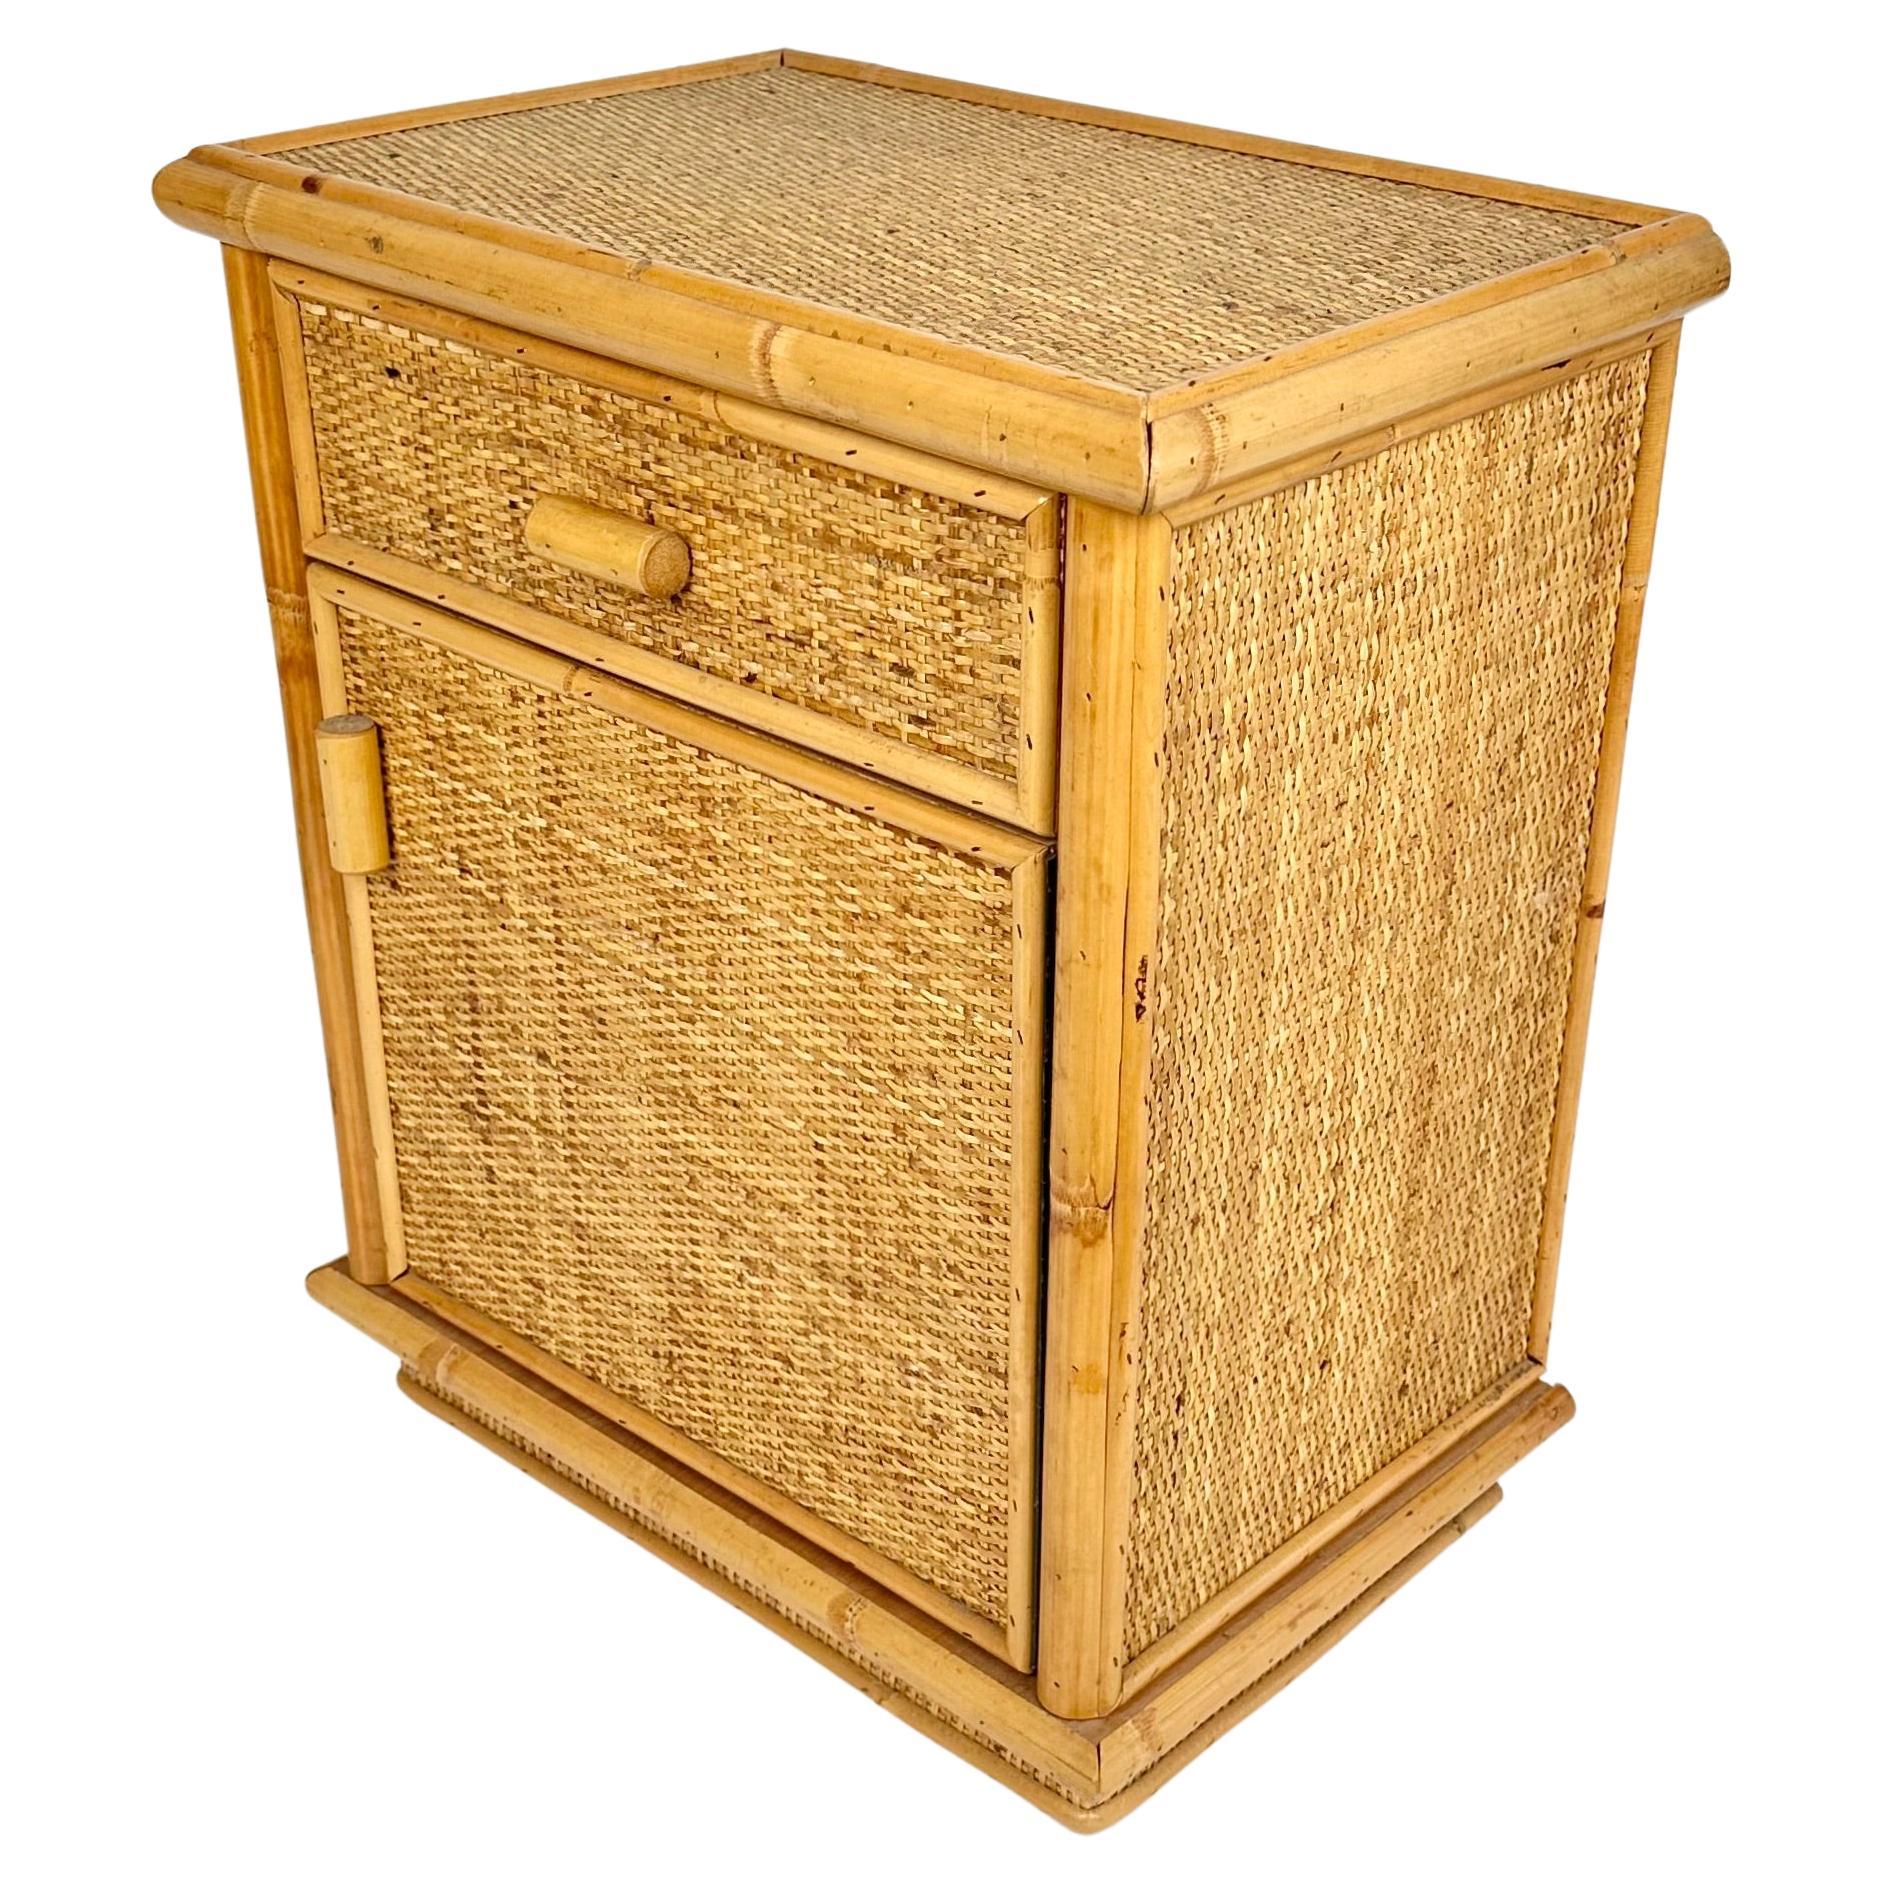 Midcentury Pair of Bed Side Tables Nightstands in Bamboo & Rattan, Italy, 1970s For Sale 3